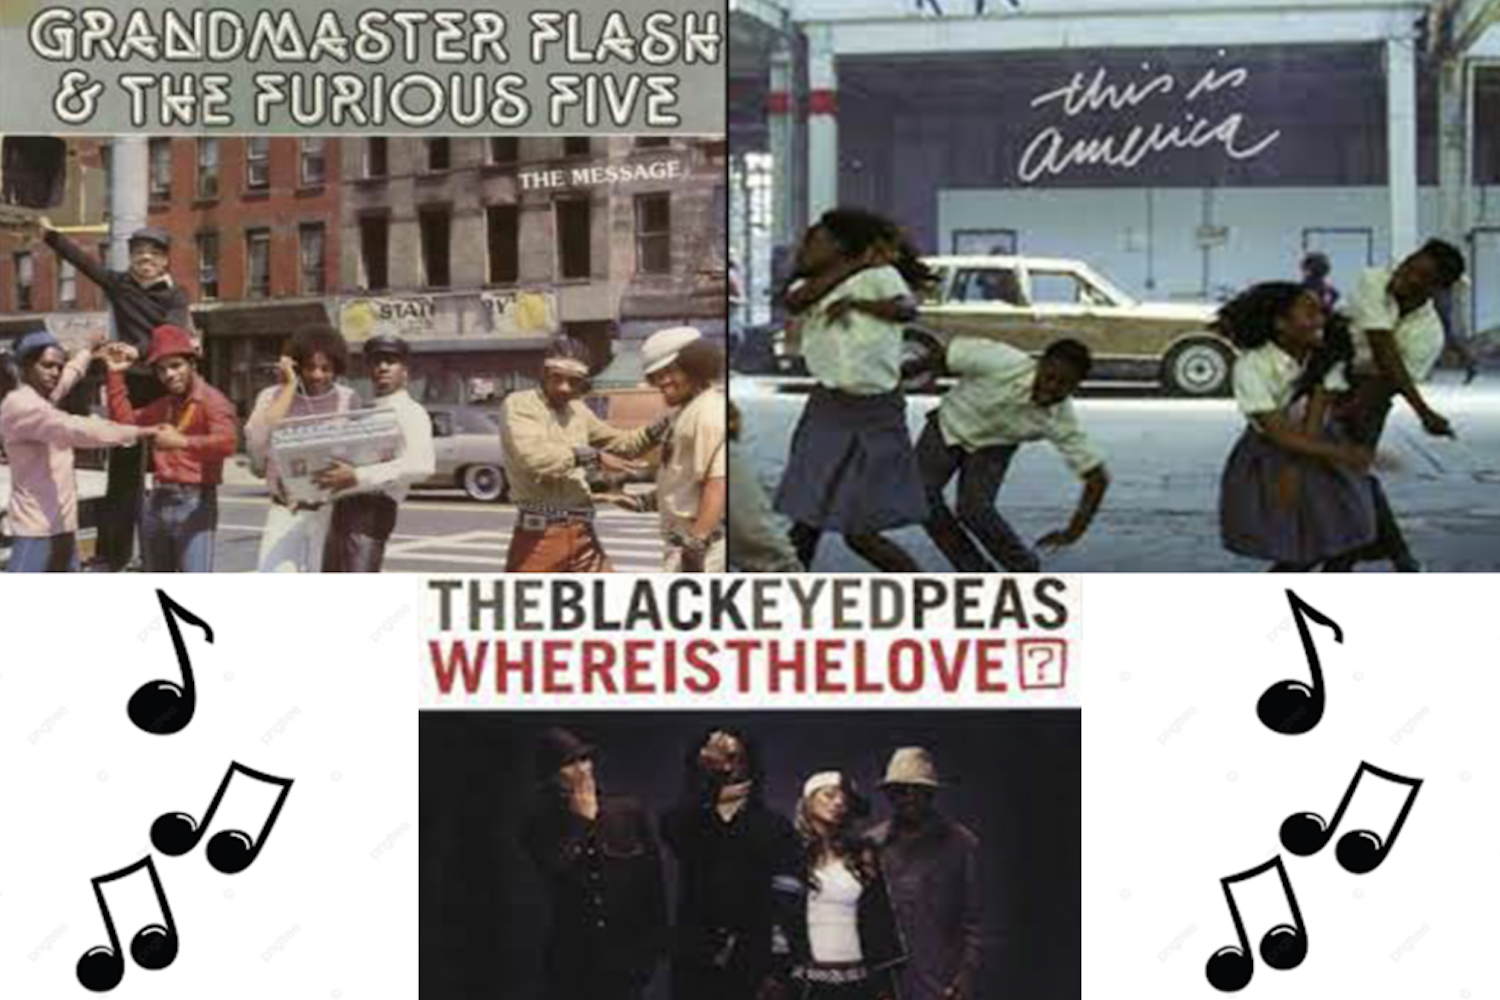 Grandmaster Flash and the Furious Five: The Message (Music Video